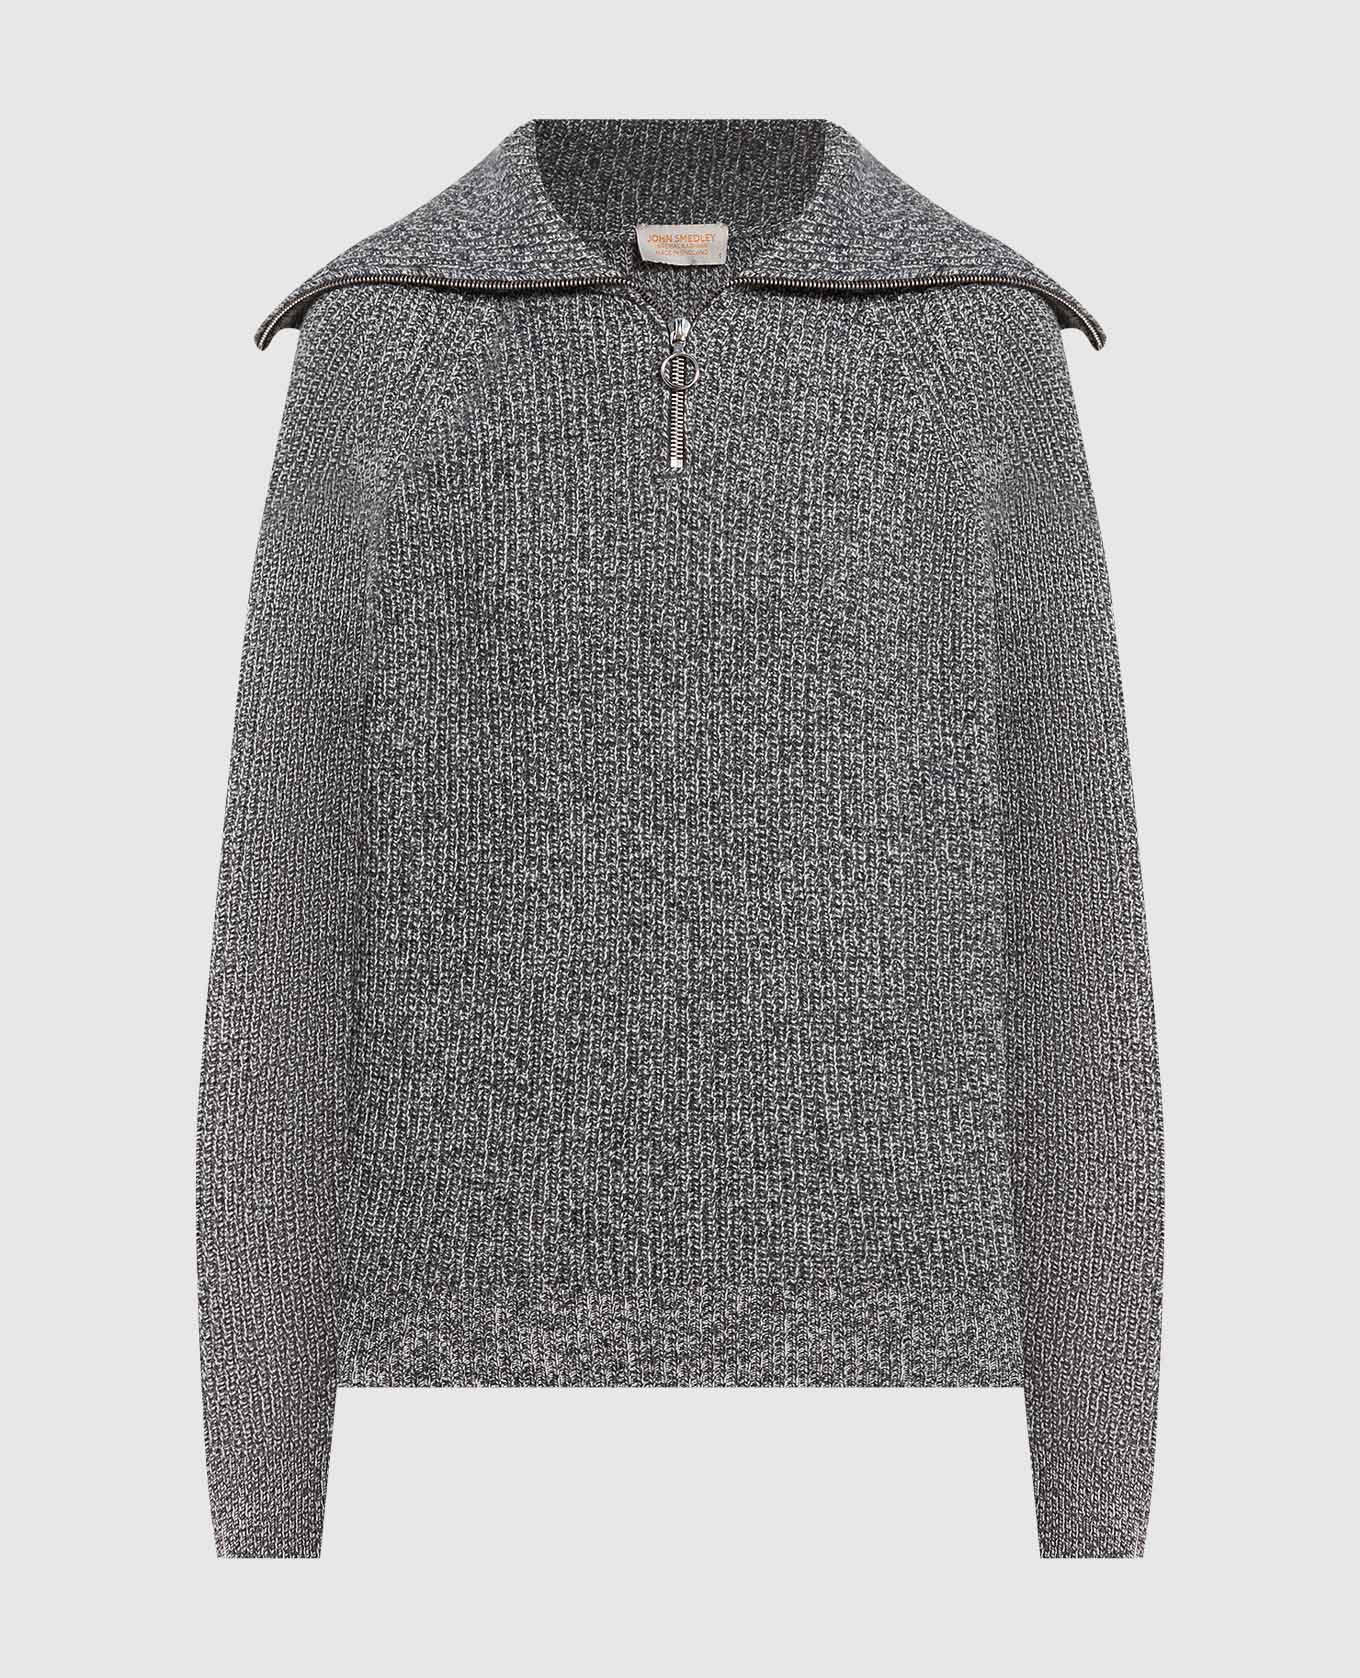 Ladley gray wool and cashmere sweater